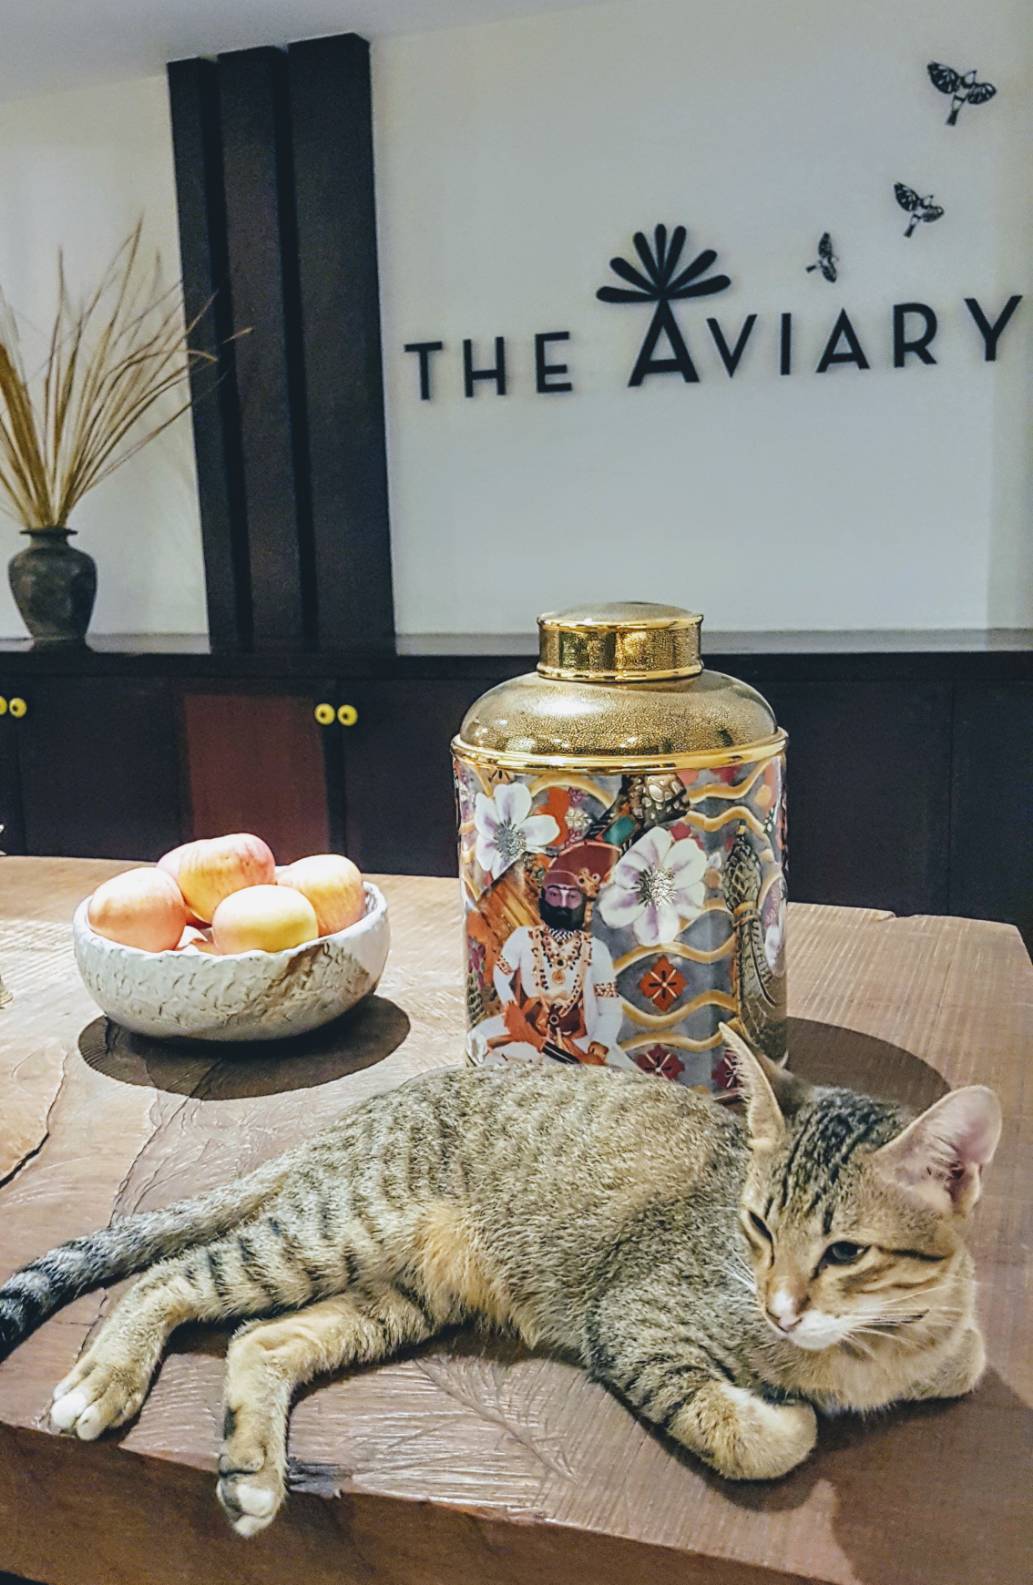 Meet BouBou - the Cat of The Aviary HotelSkype_Picture_2019_08_07T10_17_49_372Z